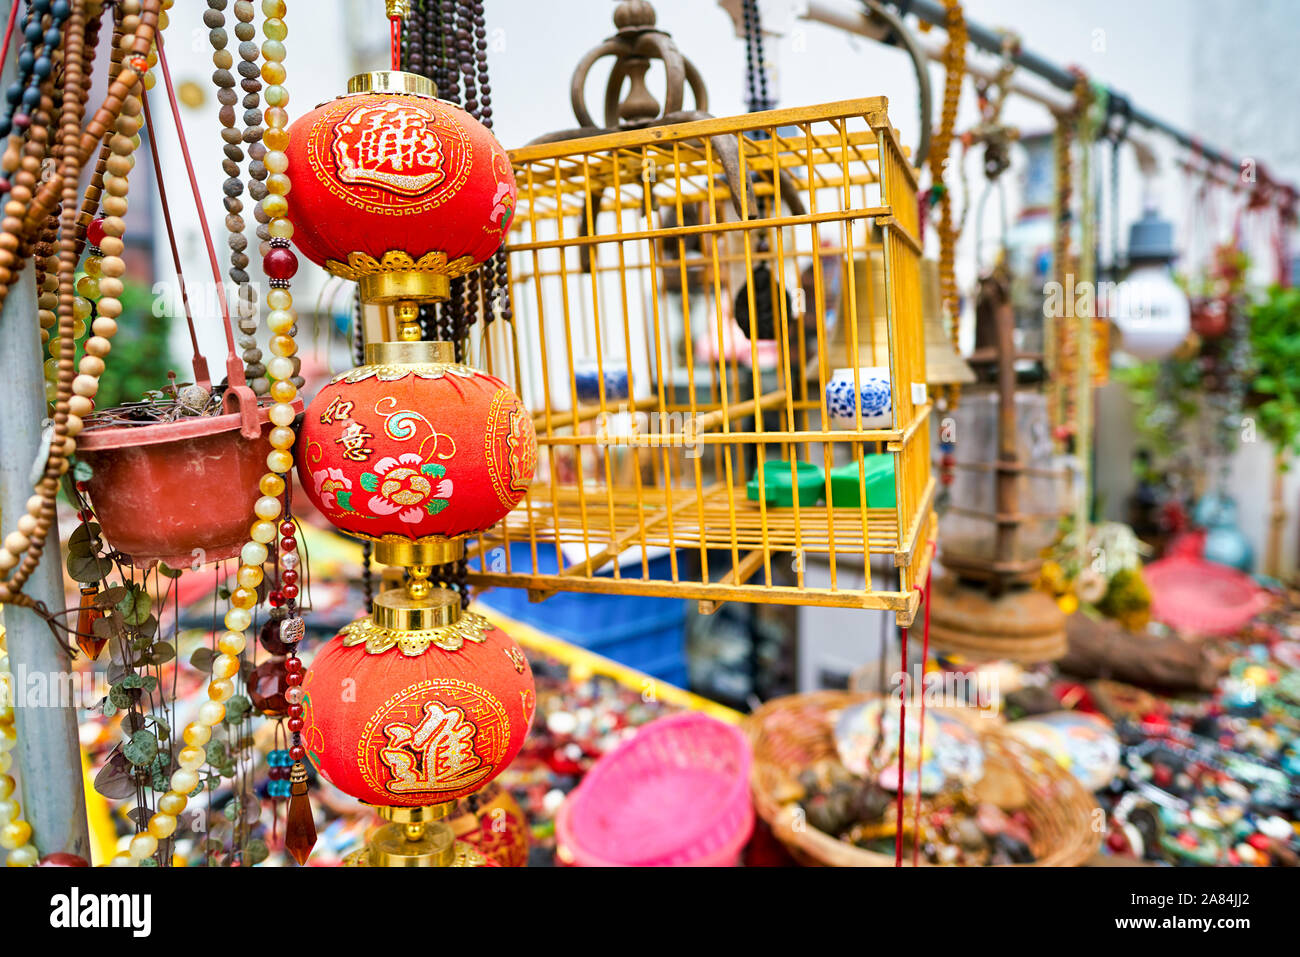 SHENZHEN, CHINA - CIRCA APRIL, 2019: close up shot of various decorations seen at Wenbo Palace. Wenbo Palace is a large architectural complex in ancie Stock Photo